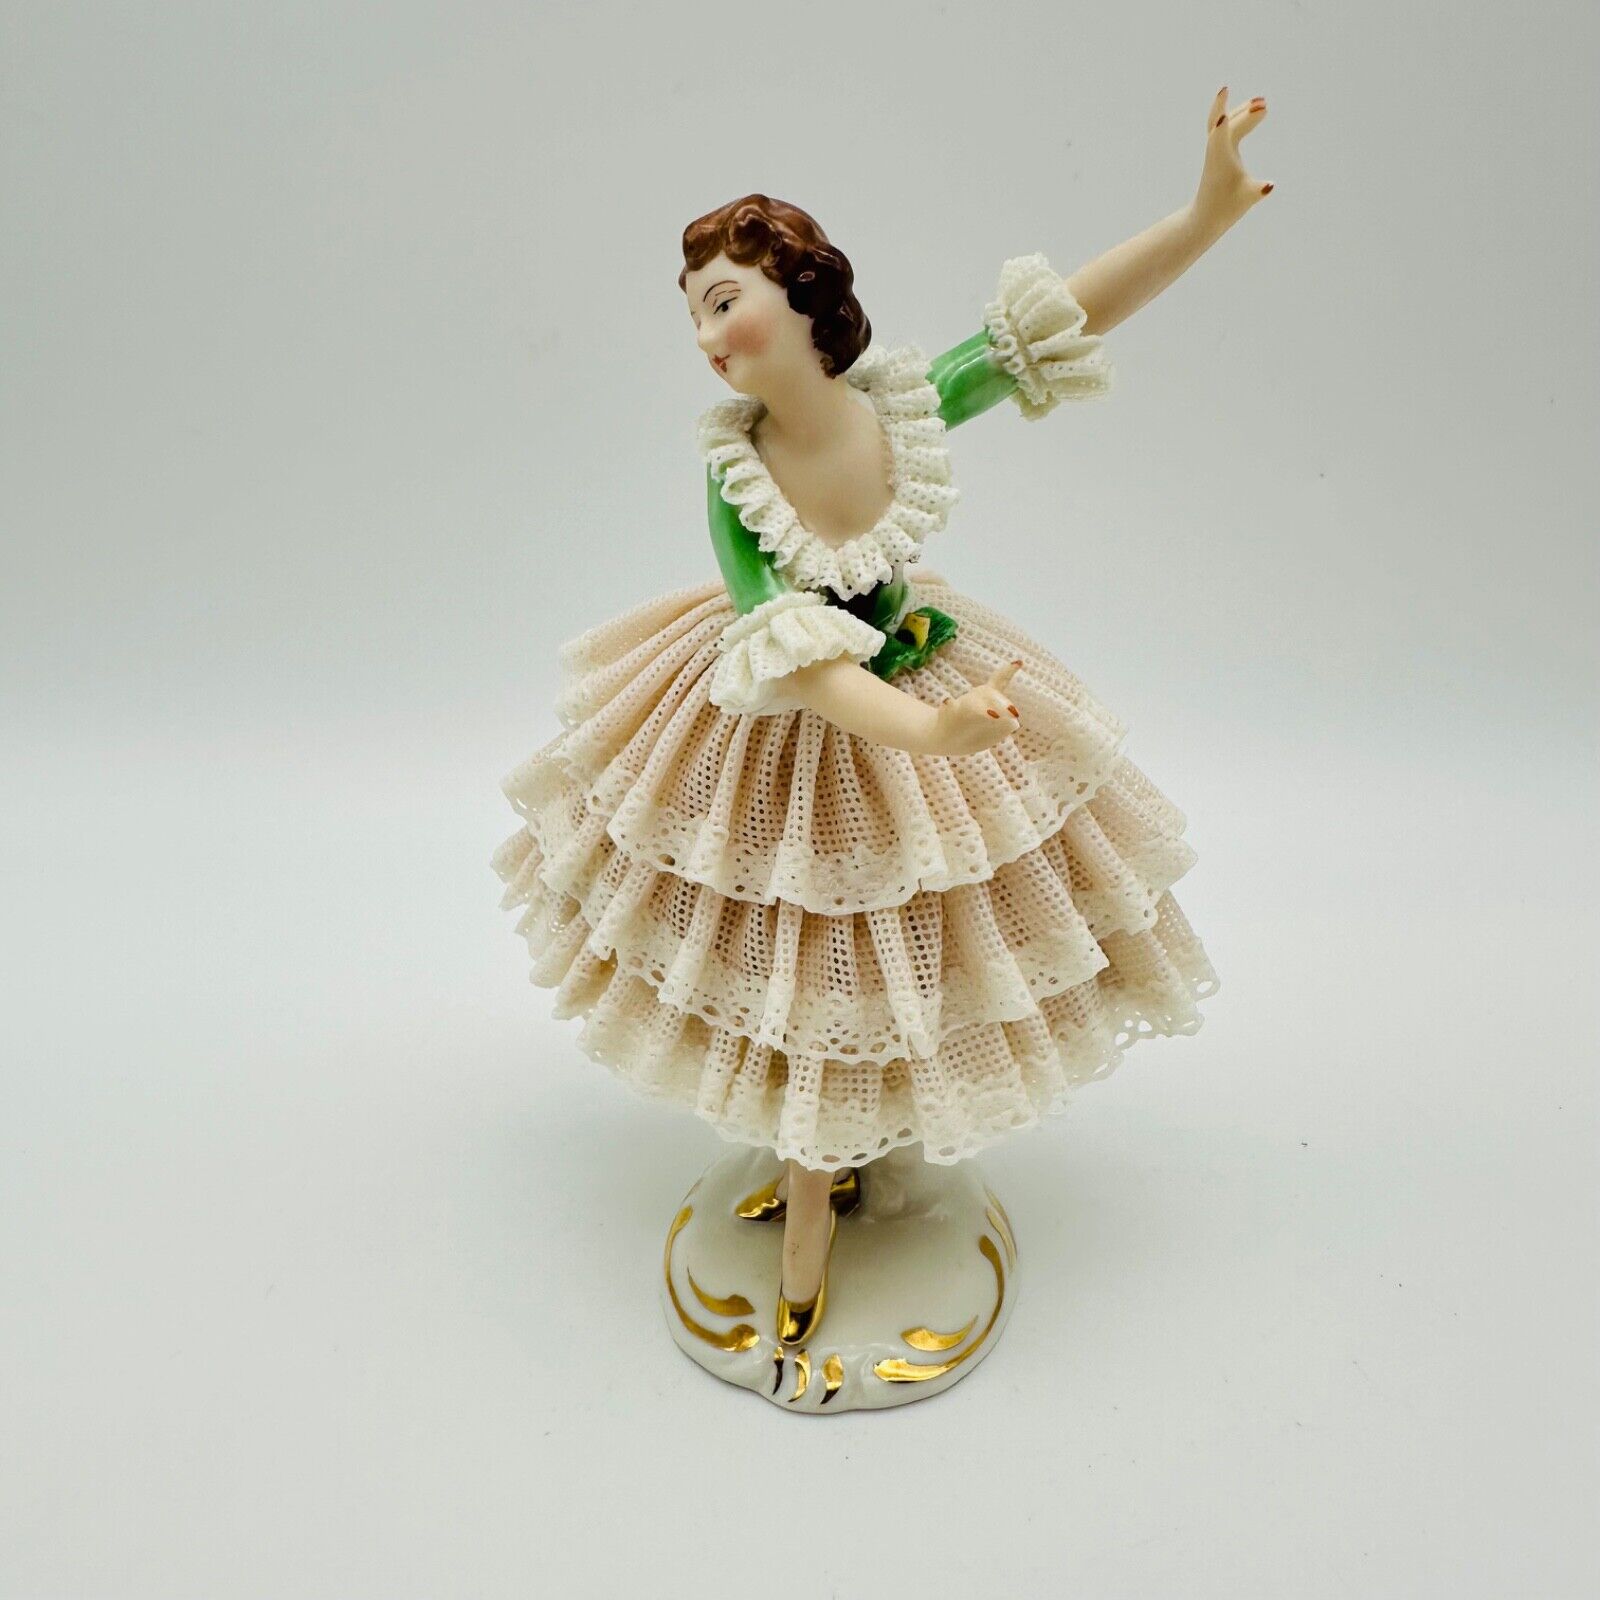 Antique Dresden Germany Lace Porcelain Figurine Lady Ballerina Dancing 5\'\' High.